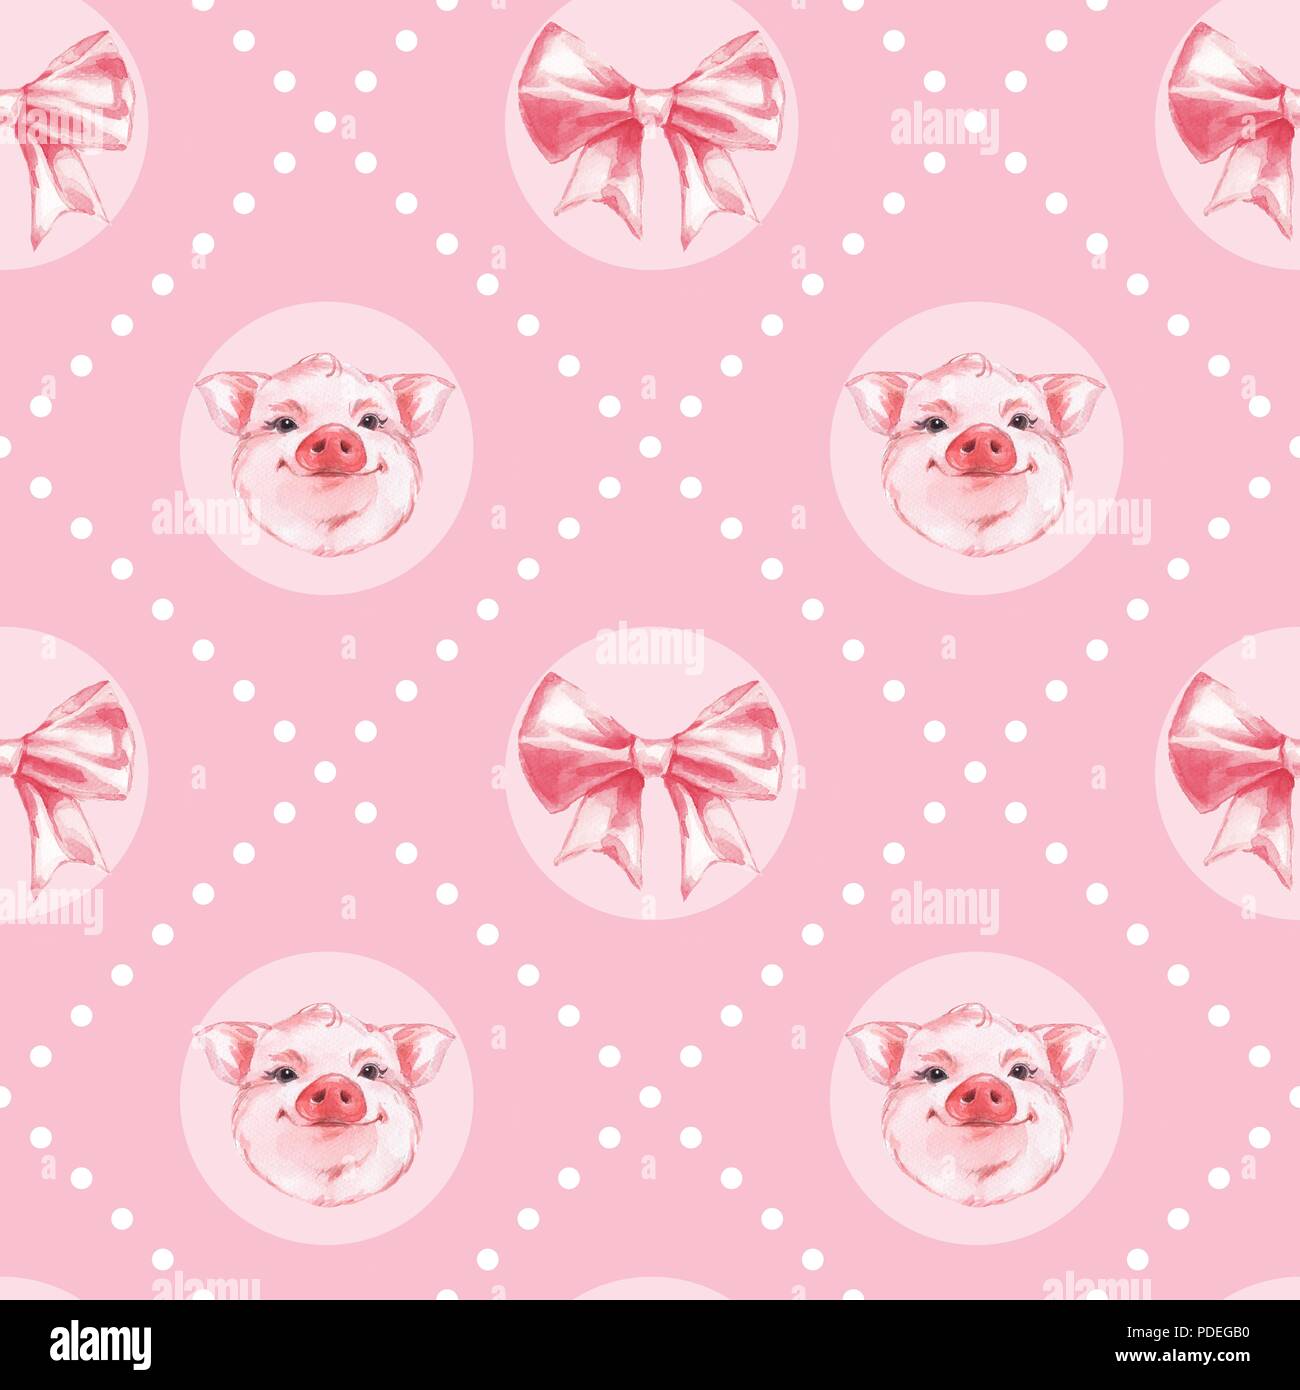 Background with funny pig. Pink watercolor seamless pattern Stock Photo